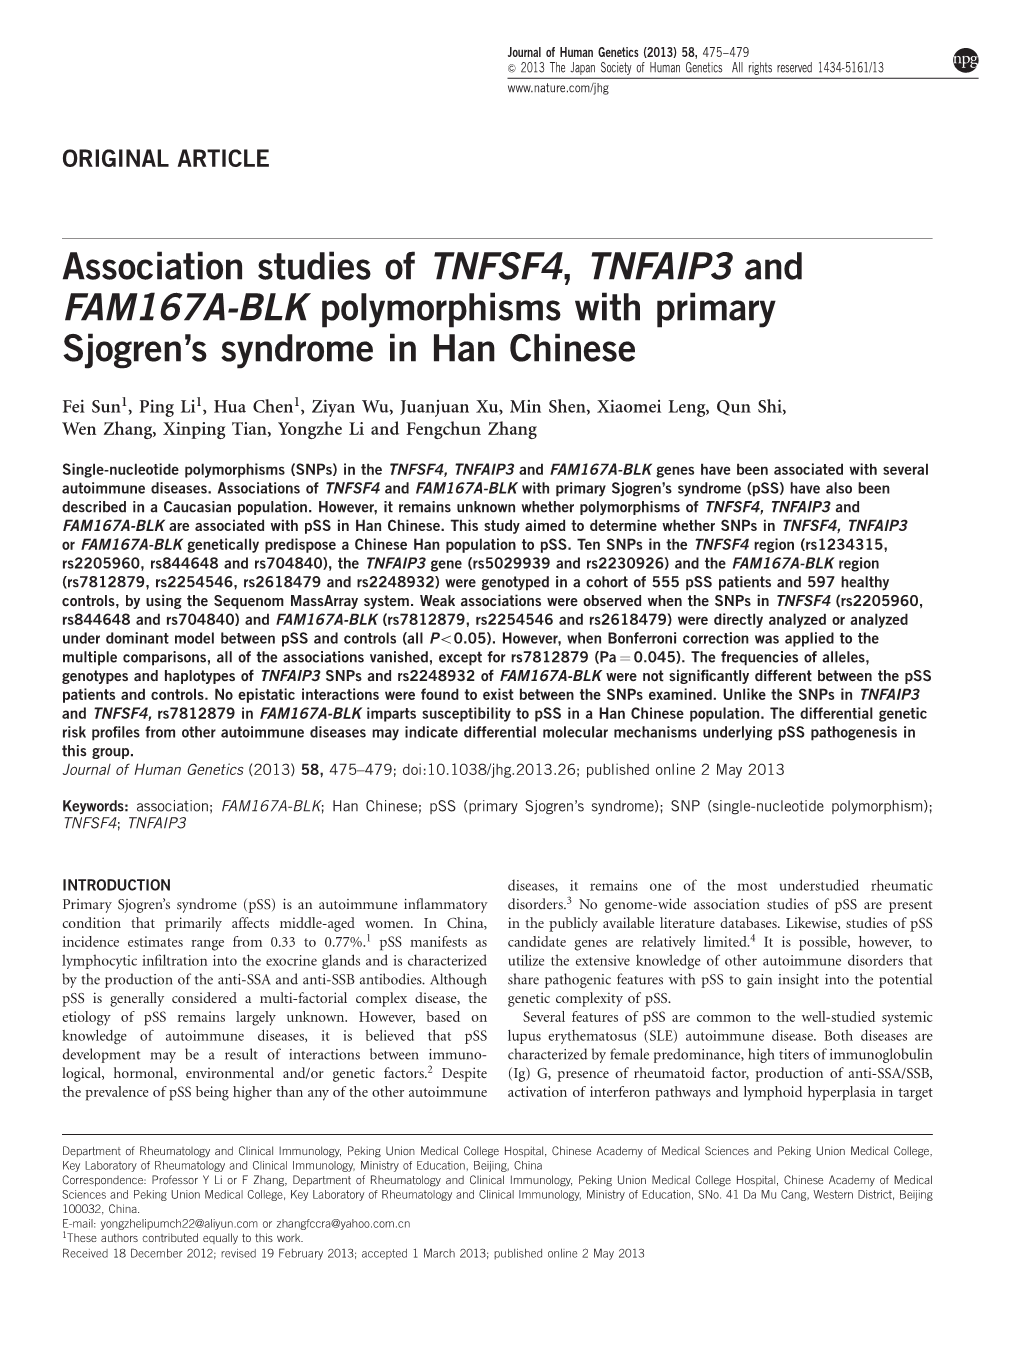 Association Studies of TNFSF4, TNFAIP3 and FAM167A-BLK Polymorphisms with Primary Sjogren’S Syndrome in Han Chinese